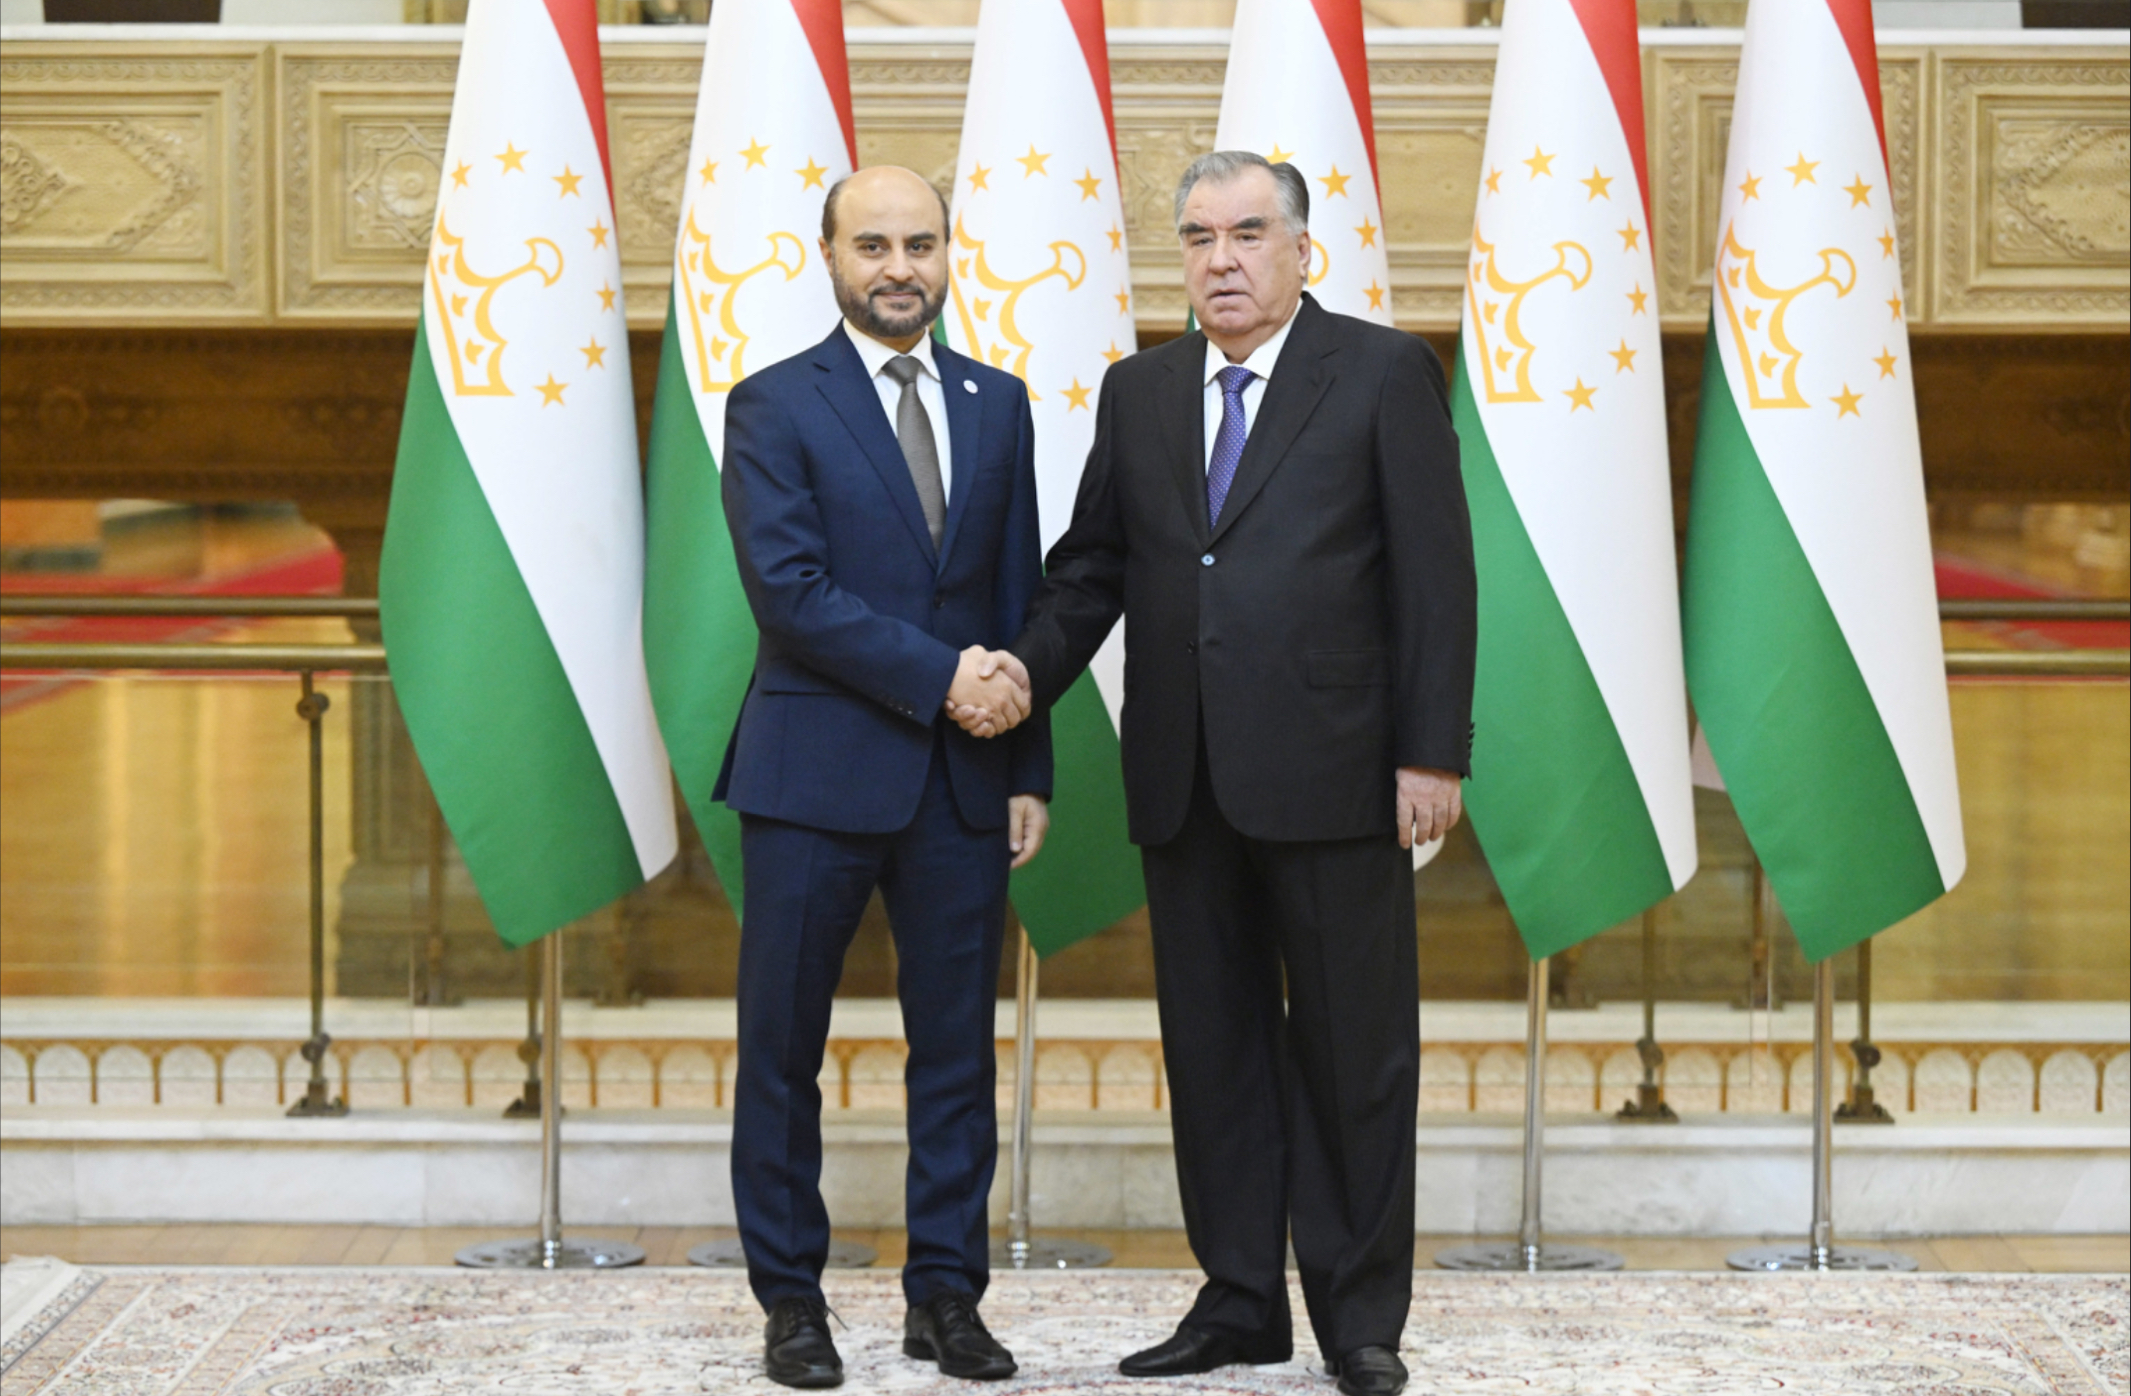 President Emomali Rahmon of the Republic of Tajikistan with Dr. Abdulhamid Alkhalifa, the General Director of the OPEC Fund for International Development